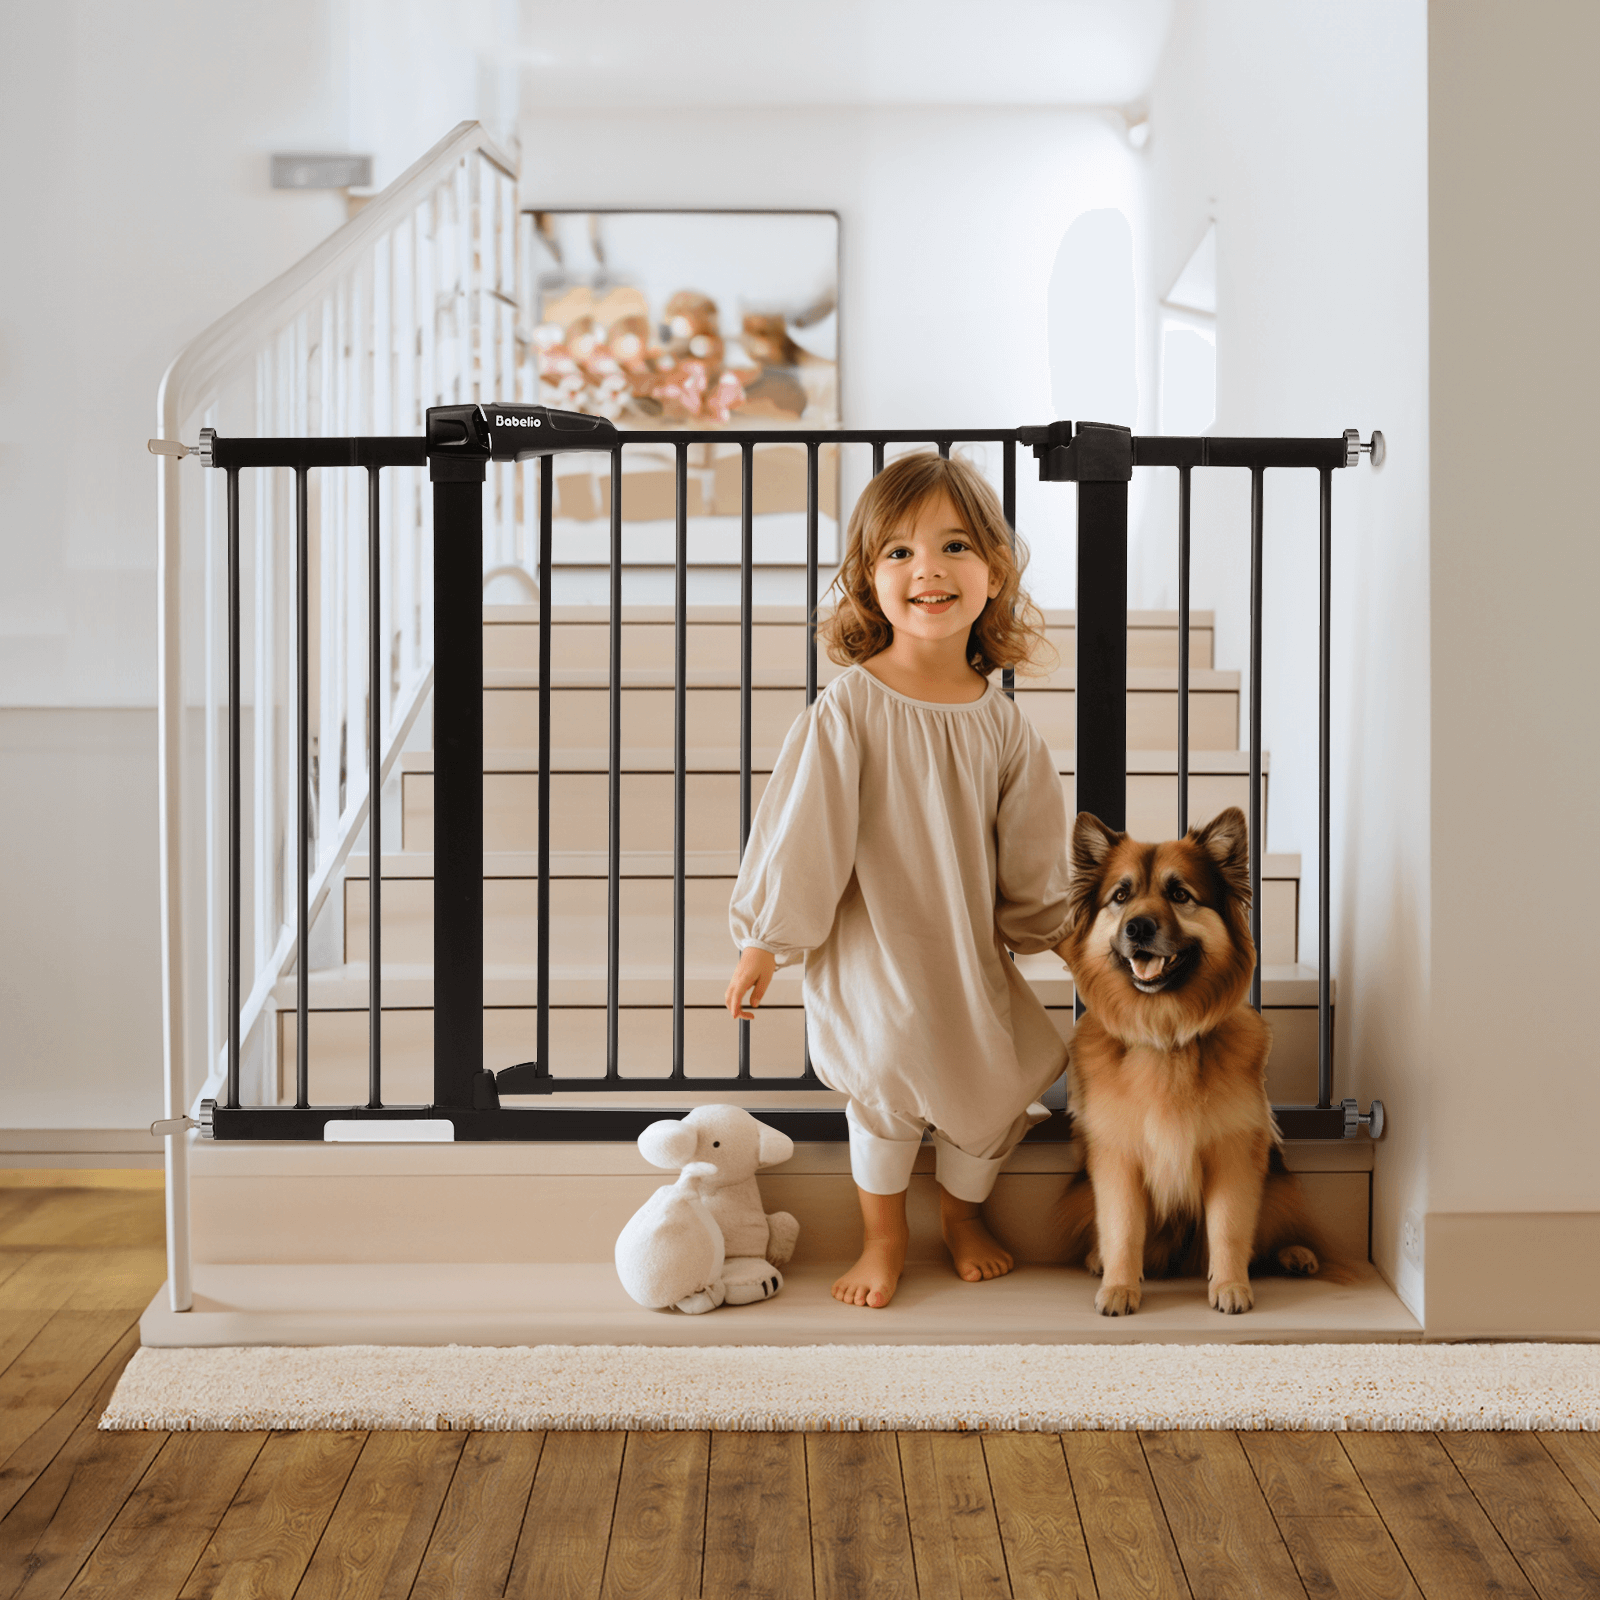 Babelio Auto-Close Metal Baby Gate with Double Lock - Easy Install 29-48'' Wide Pressure Mounted Child & Pet Safety Gate for Doorways & Stairs